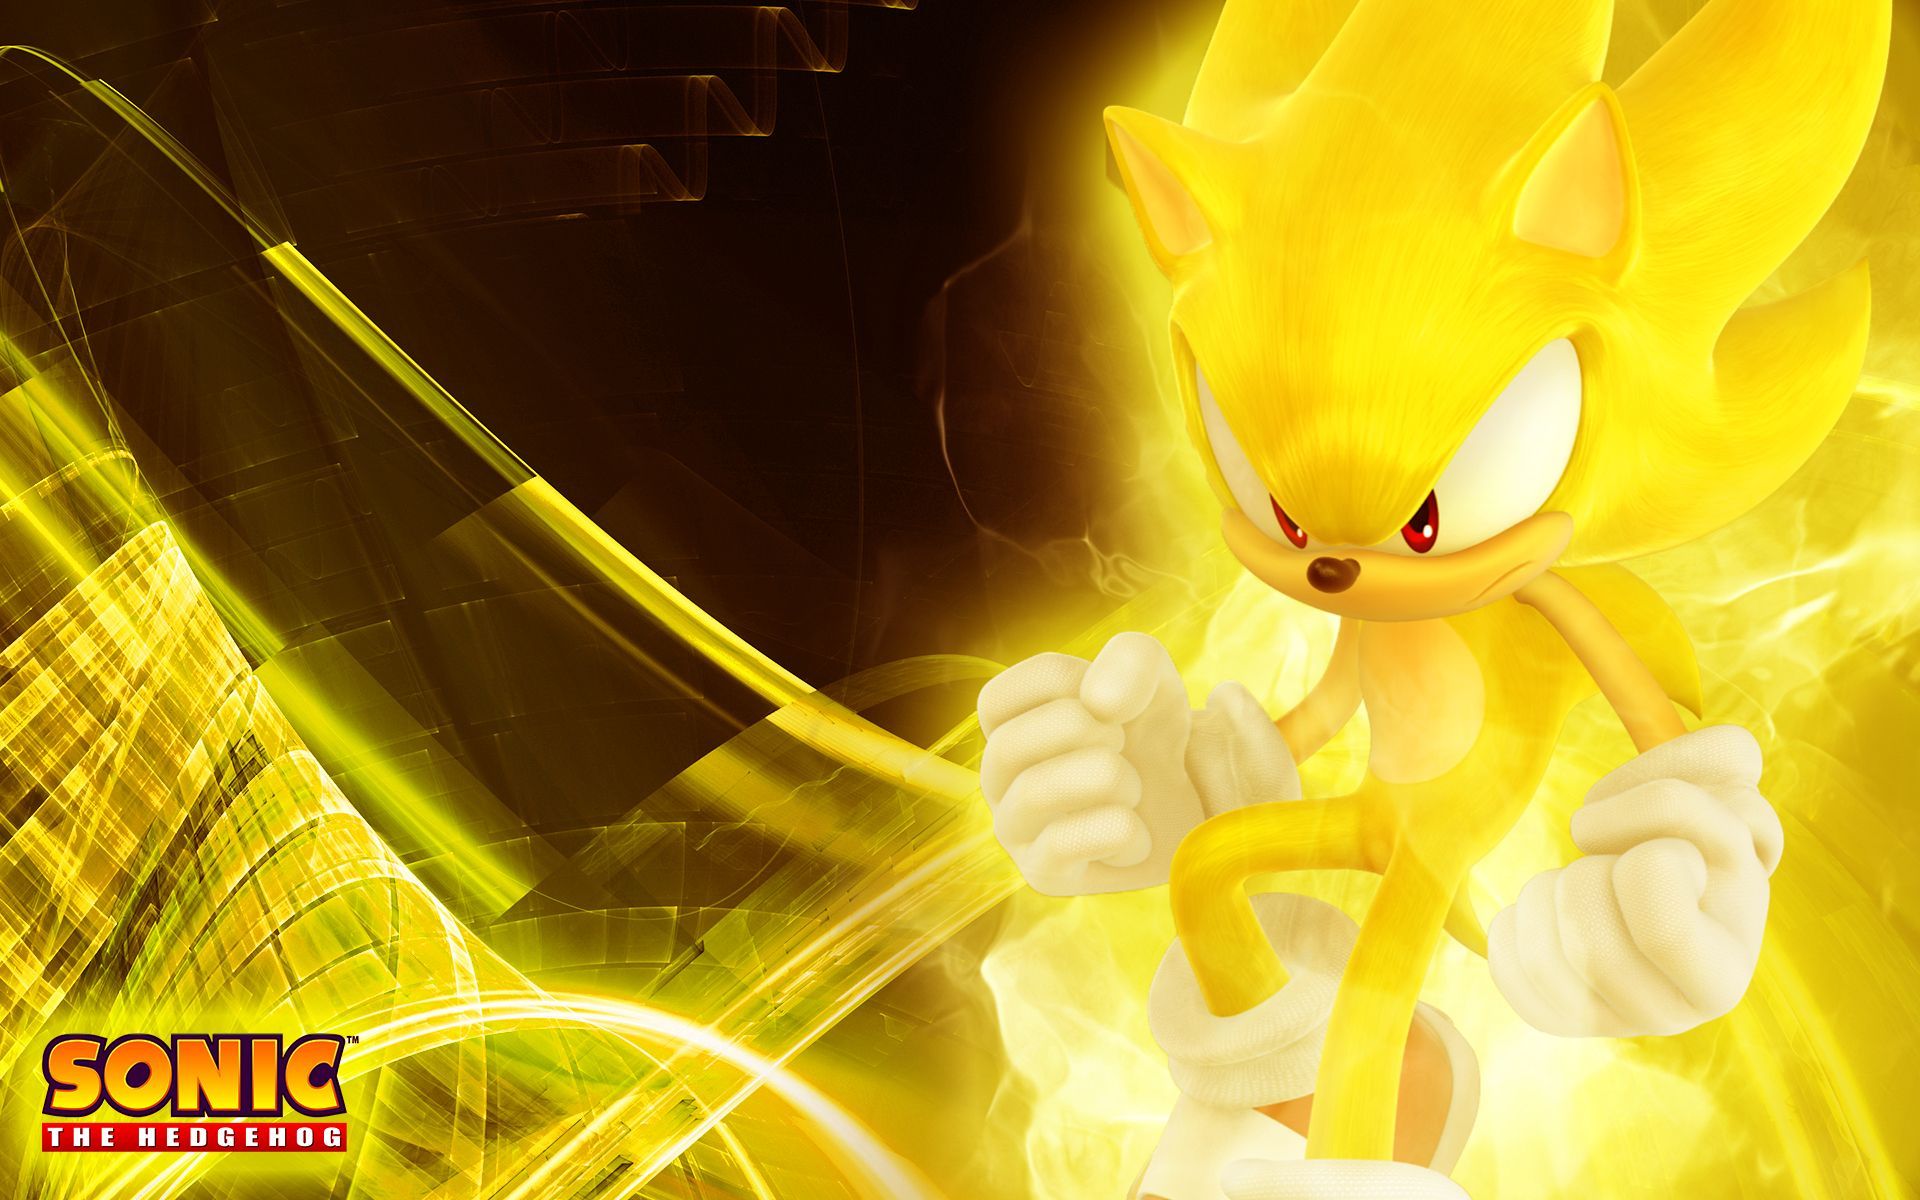 Super Sonic The Hedgehog Wallpapers Group.